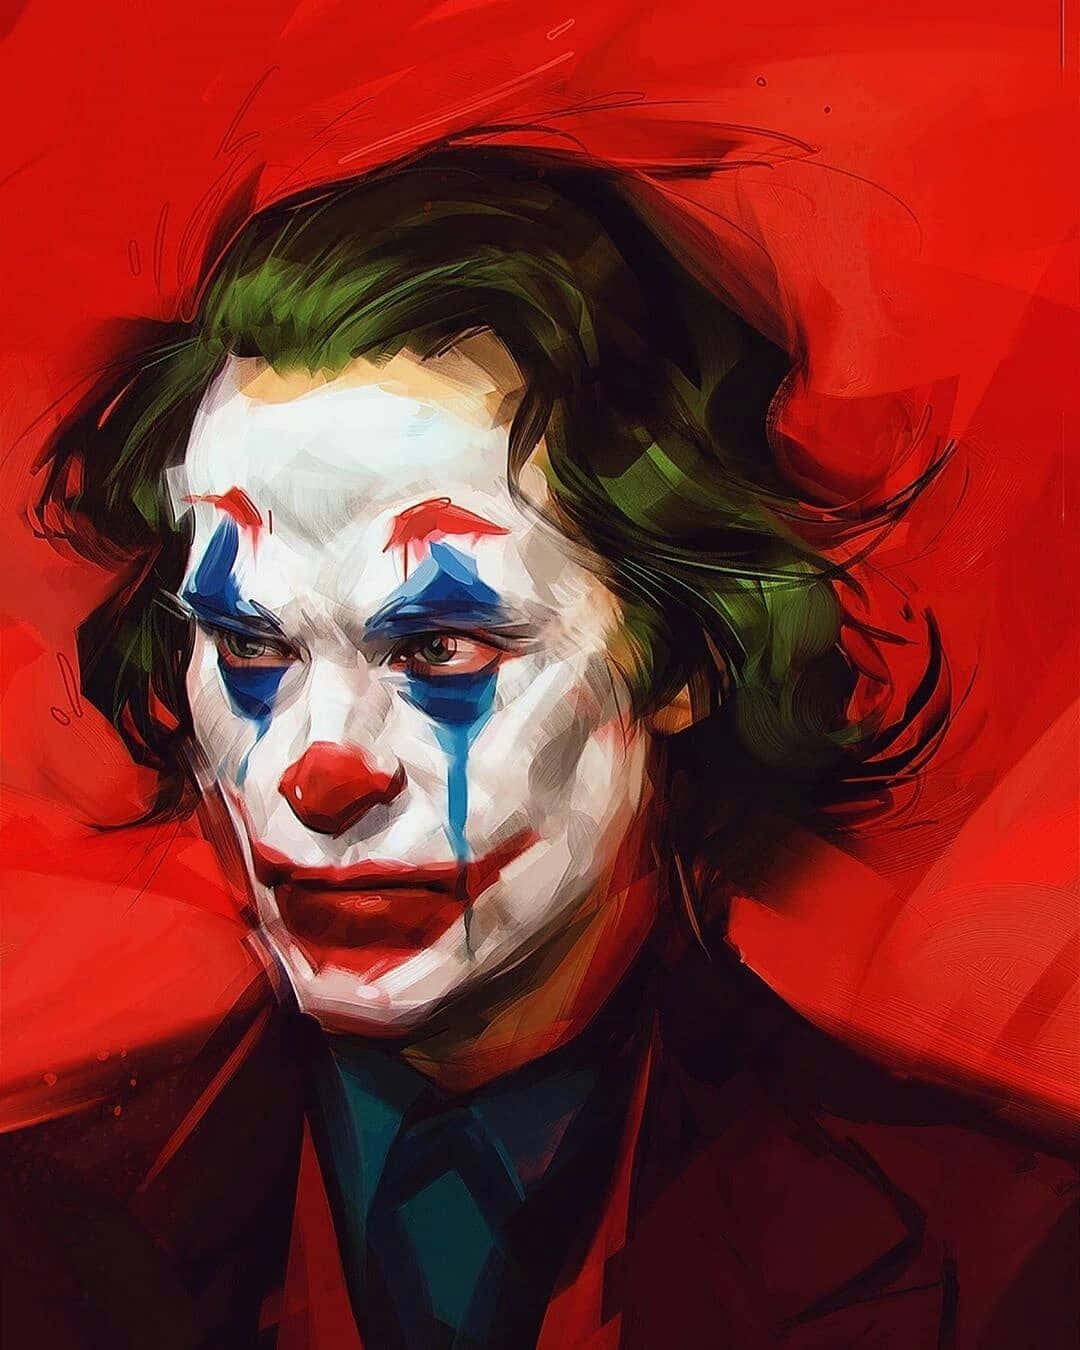 Download Expressive Joker Painting Depicting Chaos and Madness ...